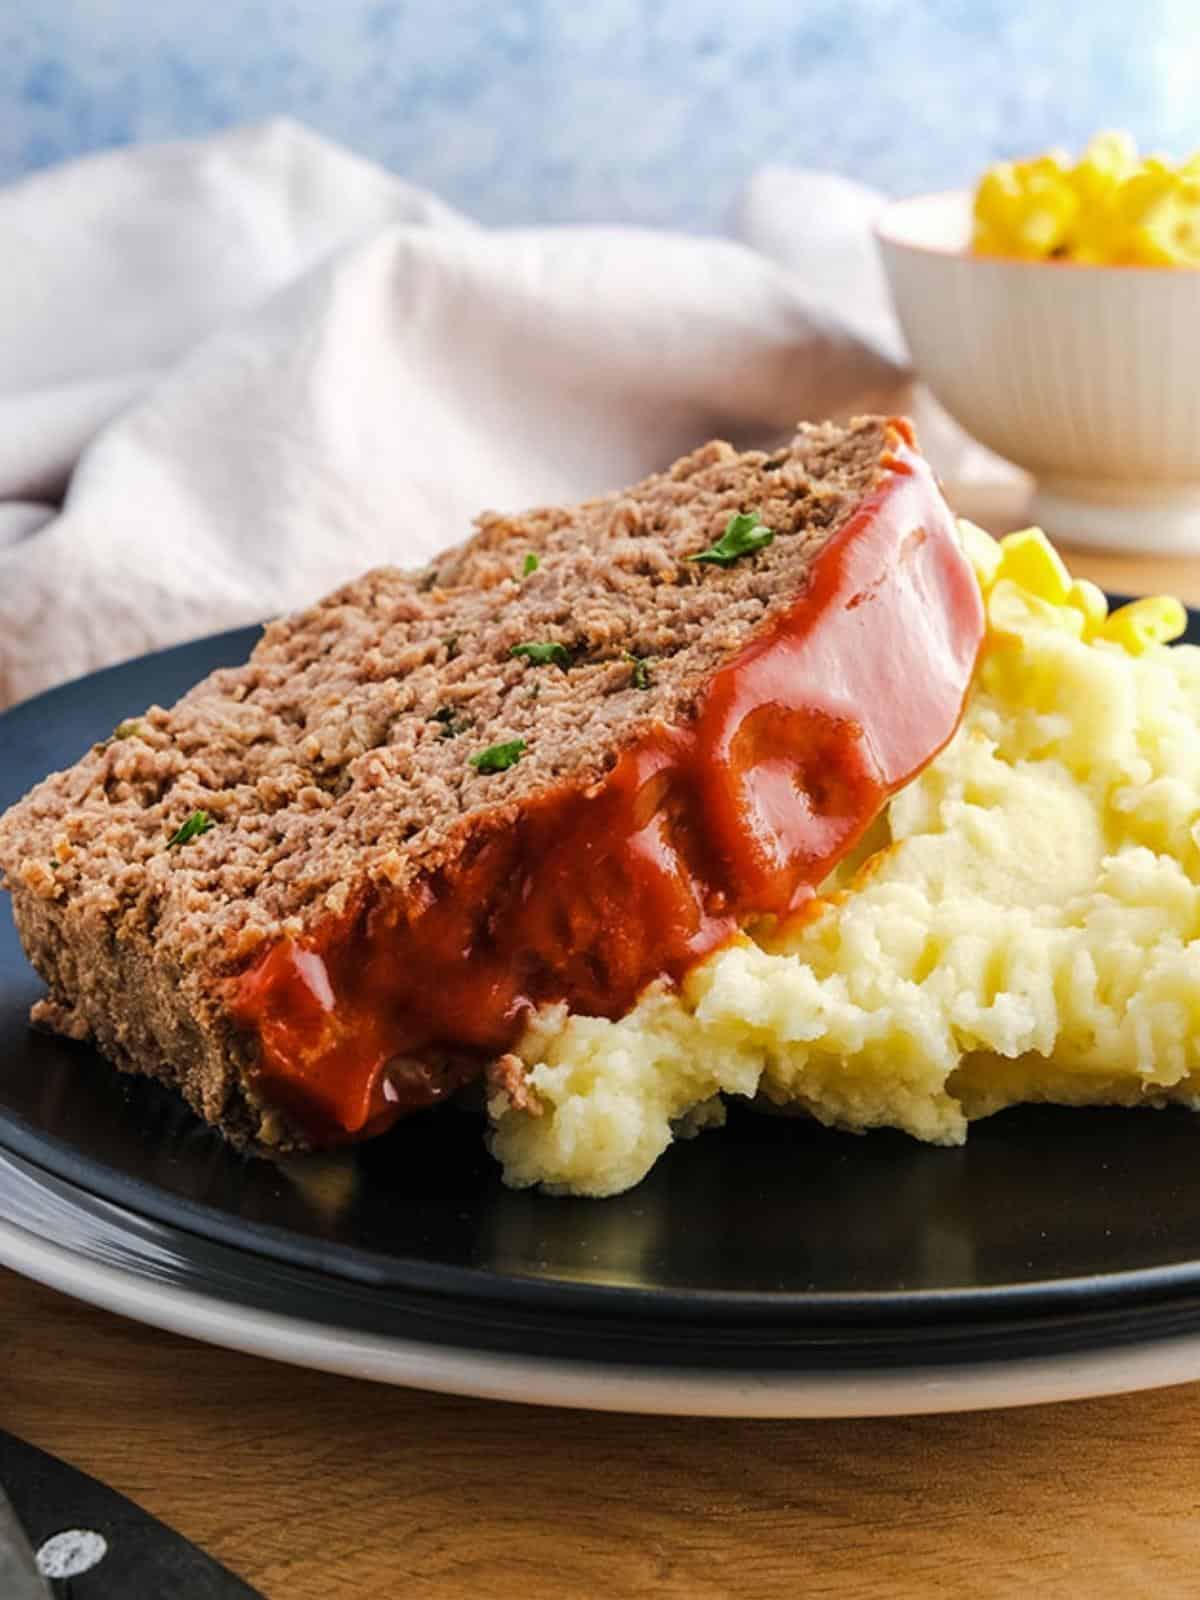 A slice of low calorie meatloaf on some mashed potato on a black plate.